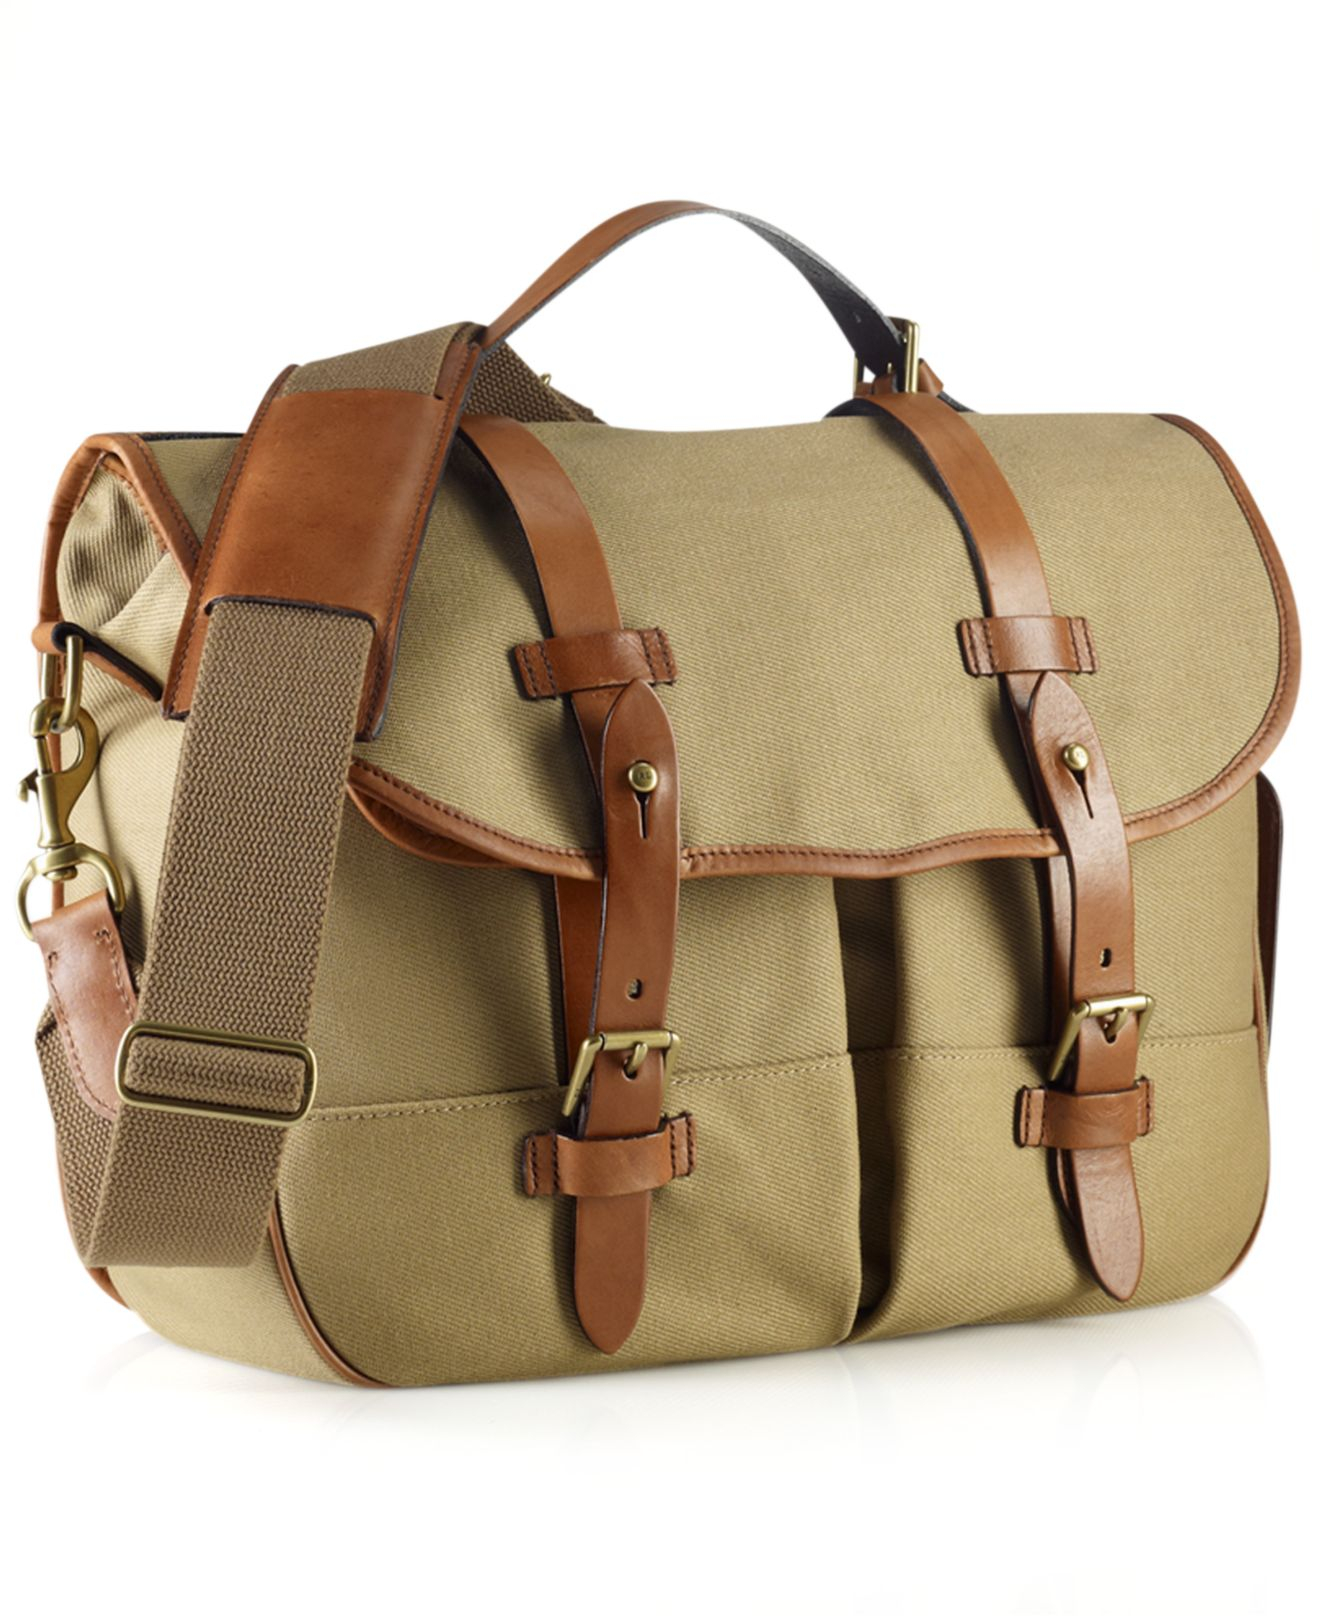 Carrier Brief Messenger Bag | Frost River | Made in USA